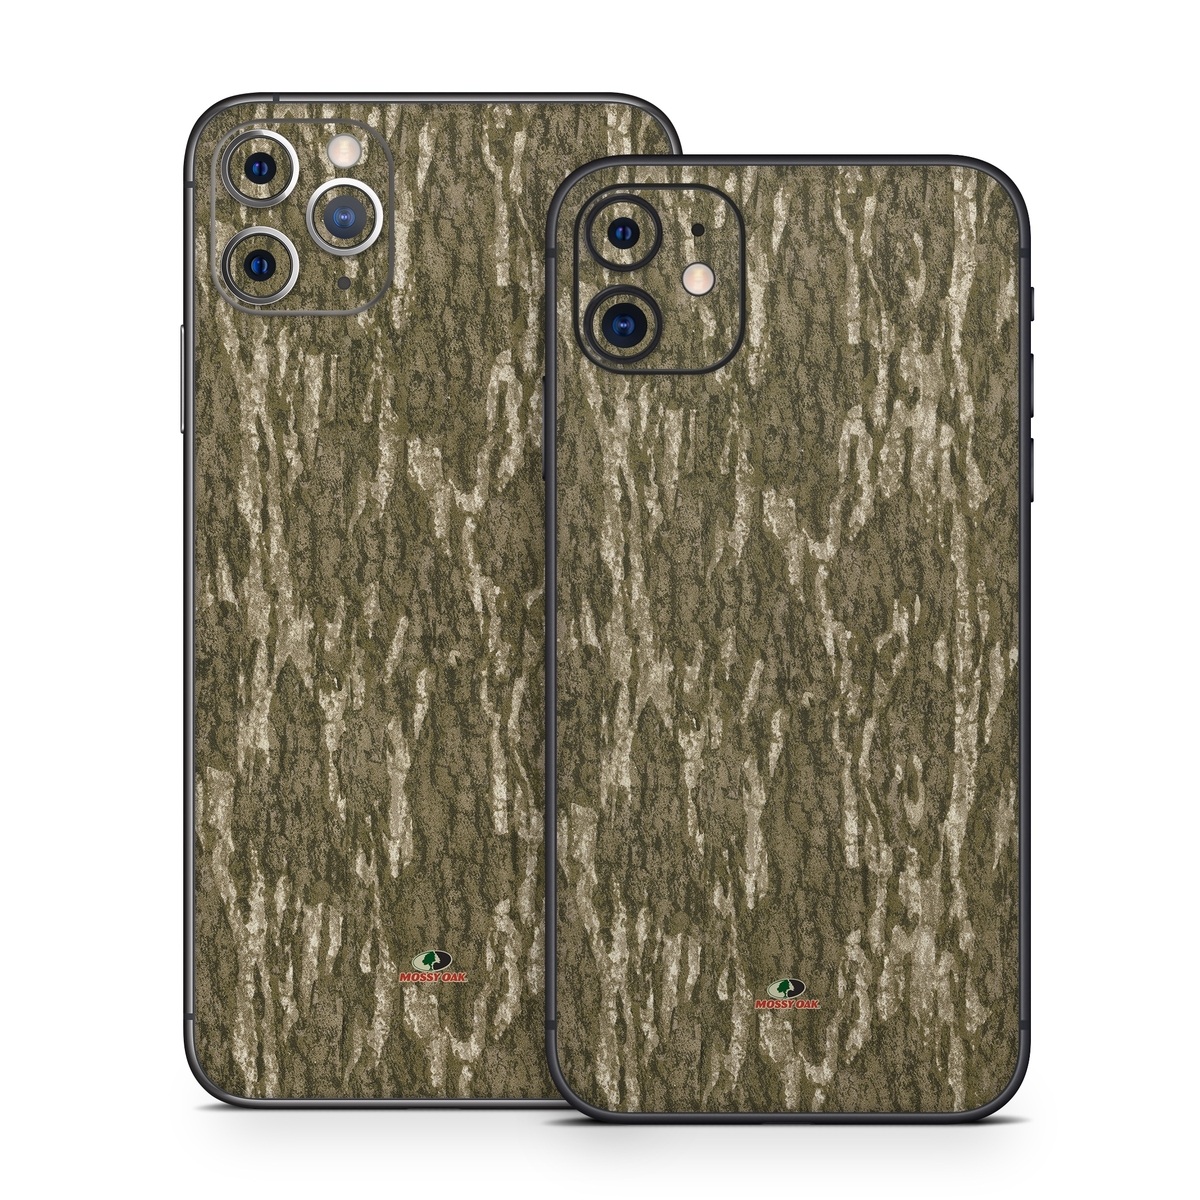 iPhone 11 Skin design of Grass, Brown, Grass family, Plant, Soil, with black, red, gray colors